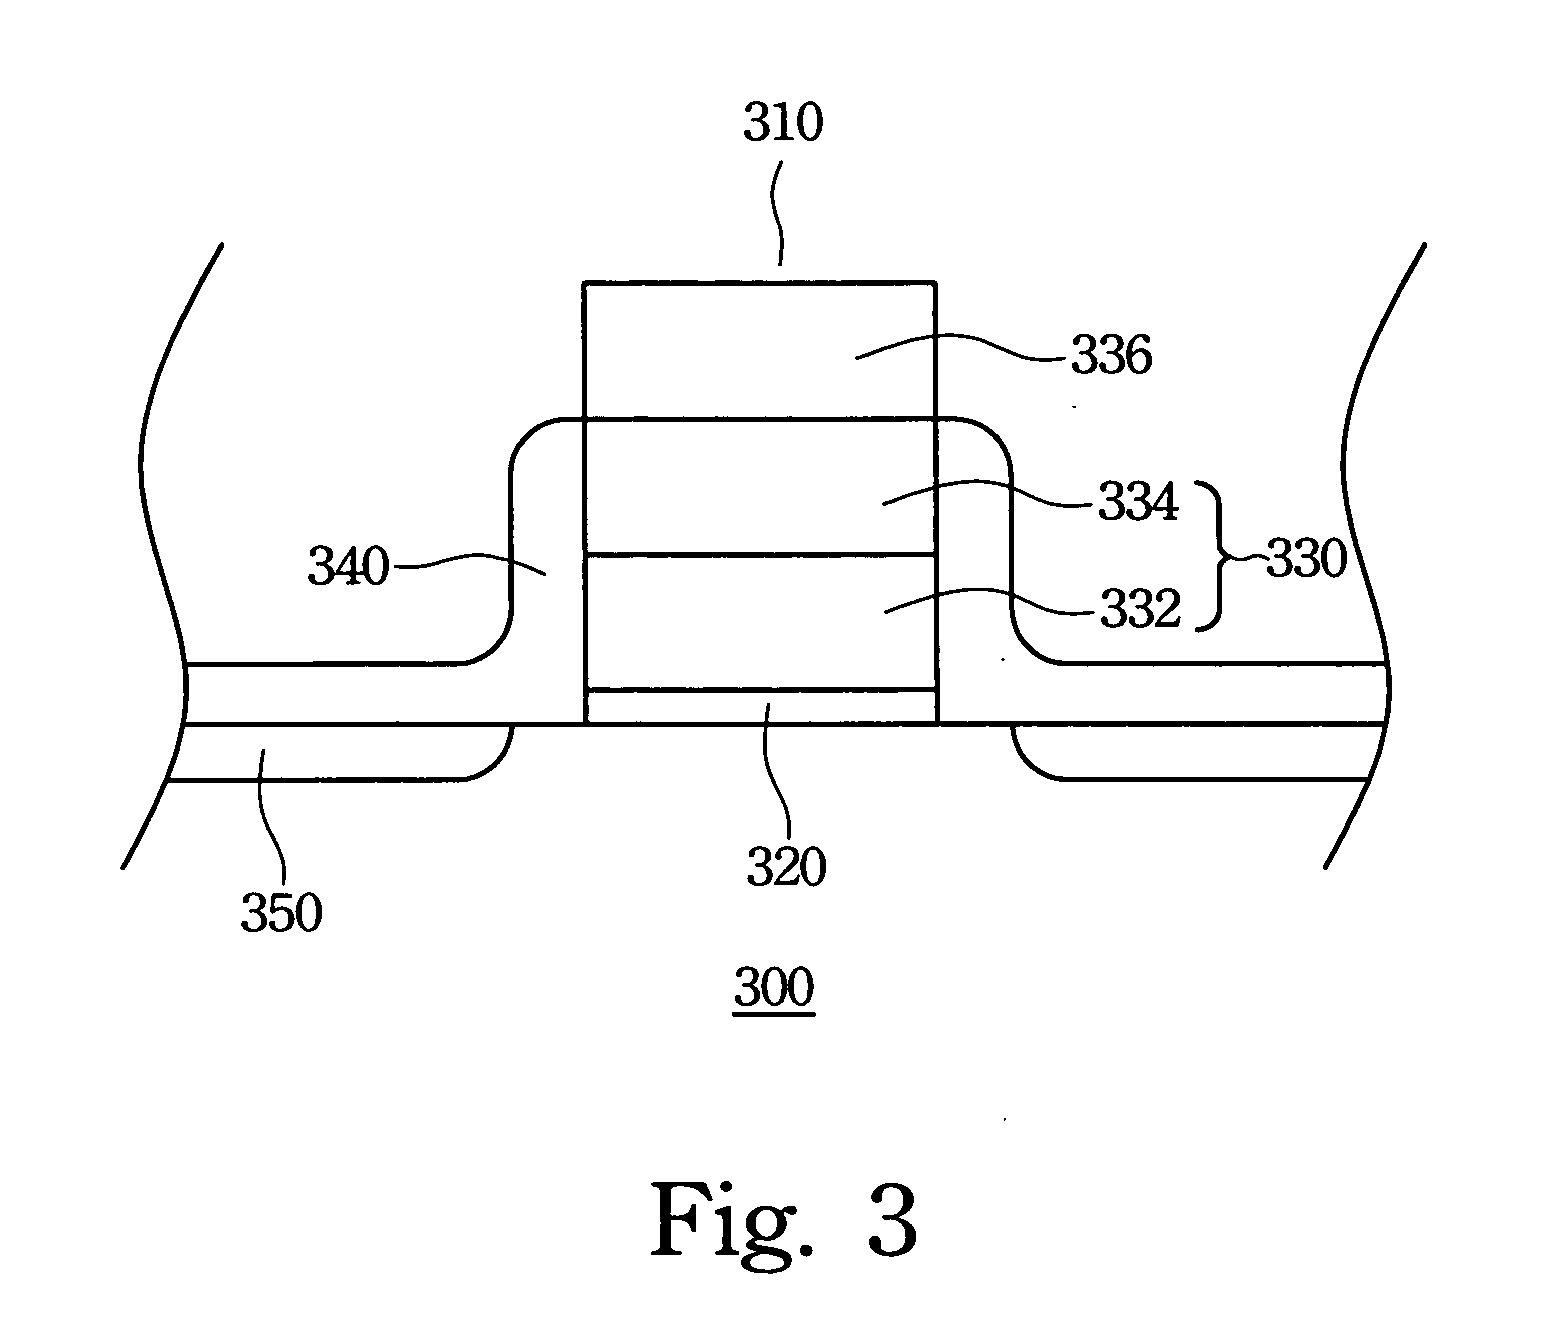 Method of fabricating a MOSFET device